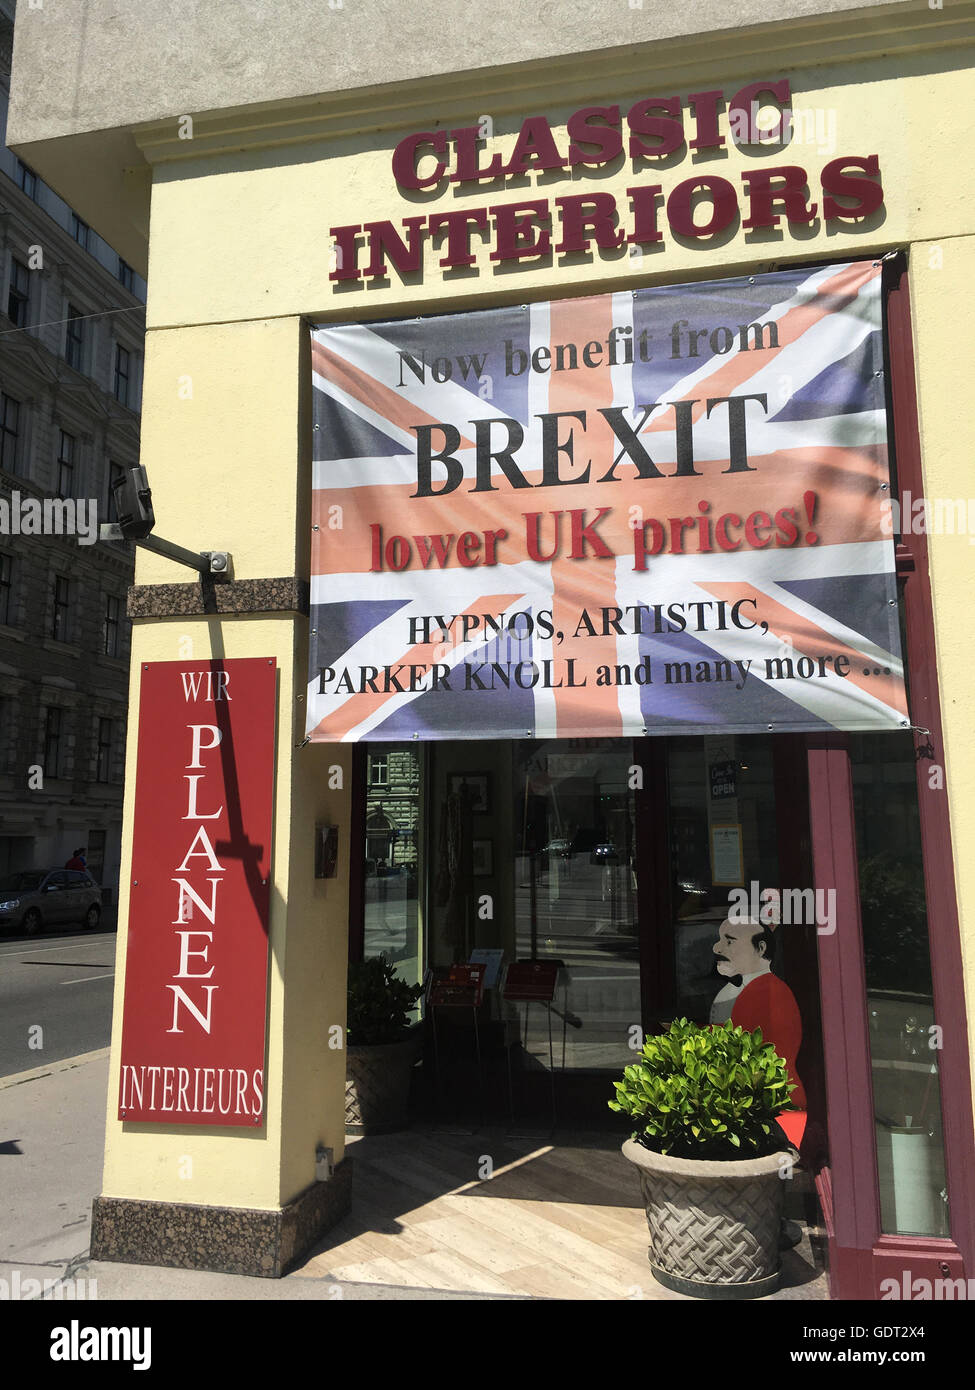 Vienna, Austria 21st July 2016 Writing on a Union Jack flag at a shop entrance in Vienna city centre which reflects the value of sterling having fallen since BREXIT and which for them is good news as products from their UK suppliers have become cheaper for them to purchase and in consequence their Austrian customers to obtain 'lower UK prices'. (c) K Hext/Alamy Live News Stock Photo